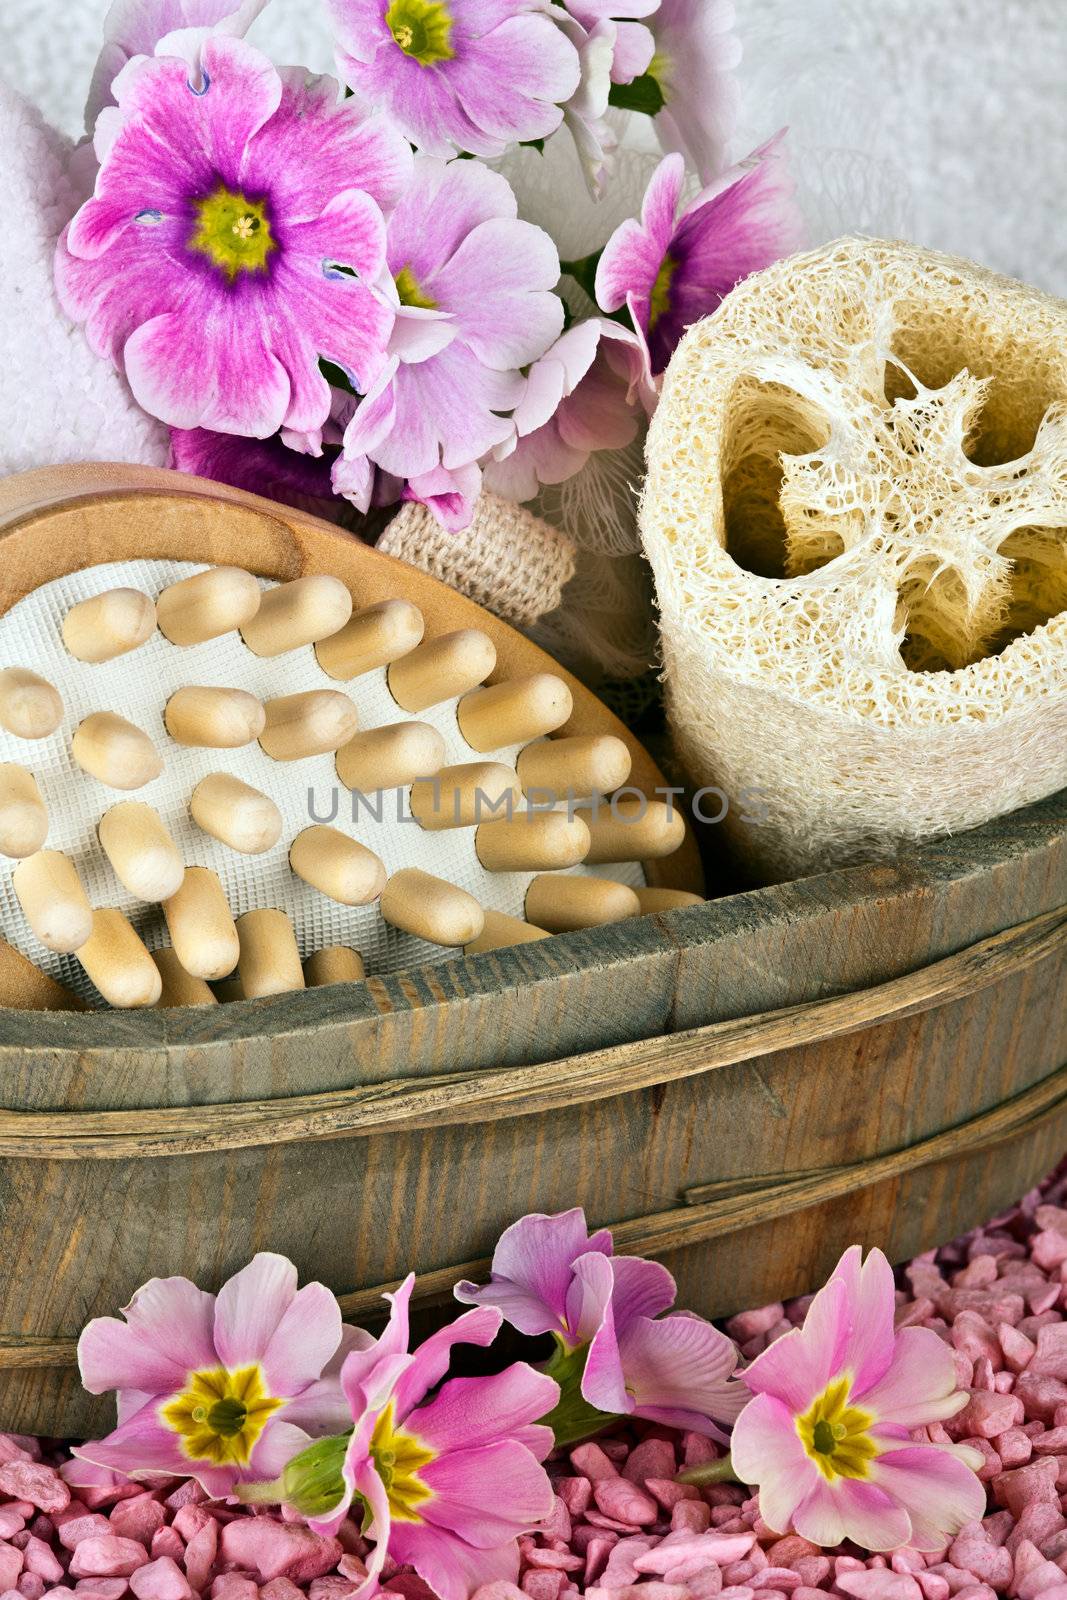 pink flowers brush and sponge for wellness in a beauty spa by juniart